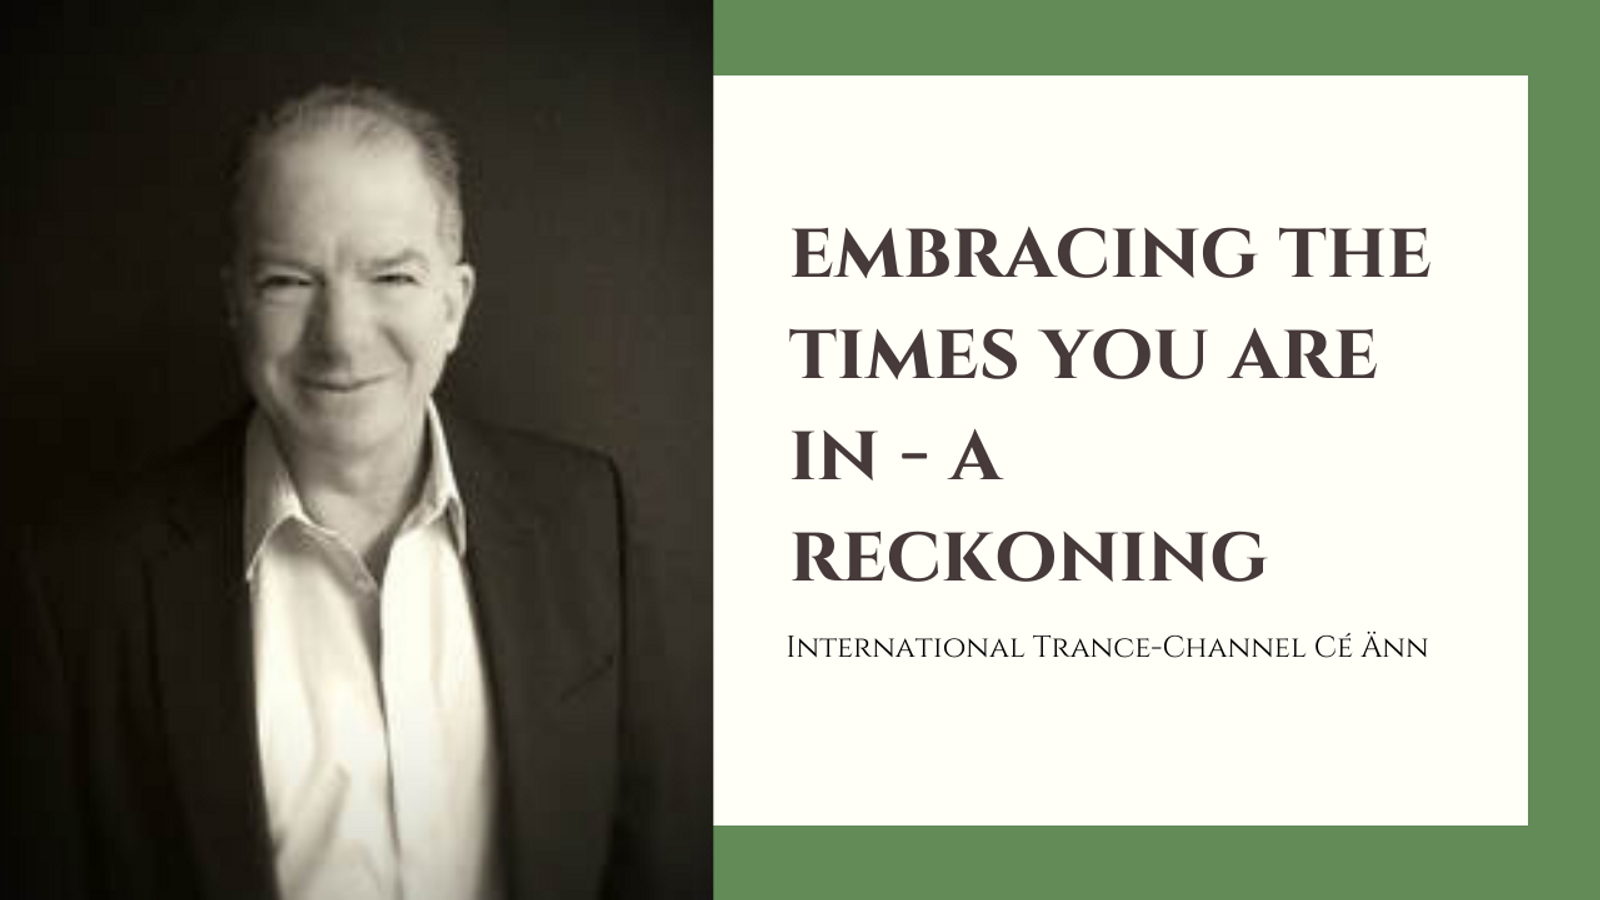 Embracing the Times You Are In - A Reckoning